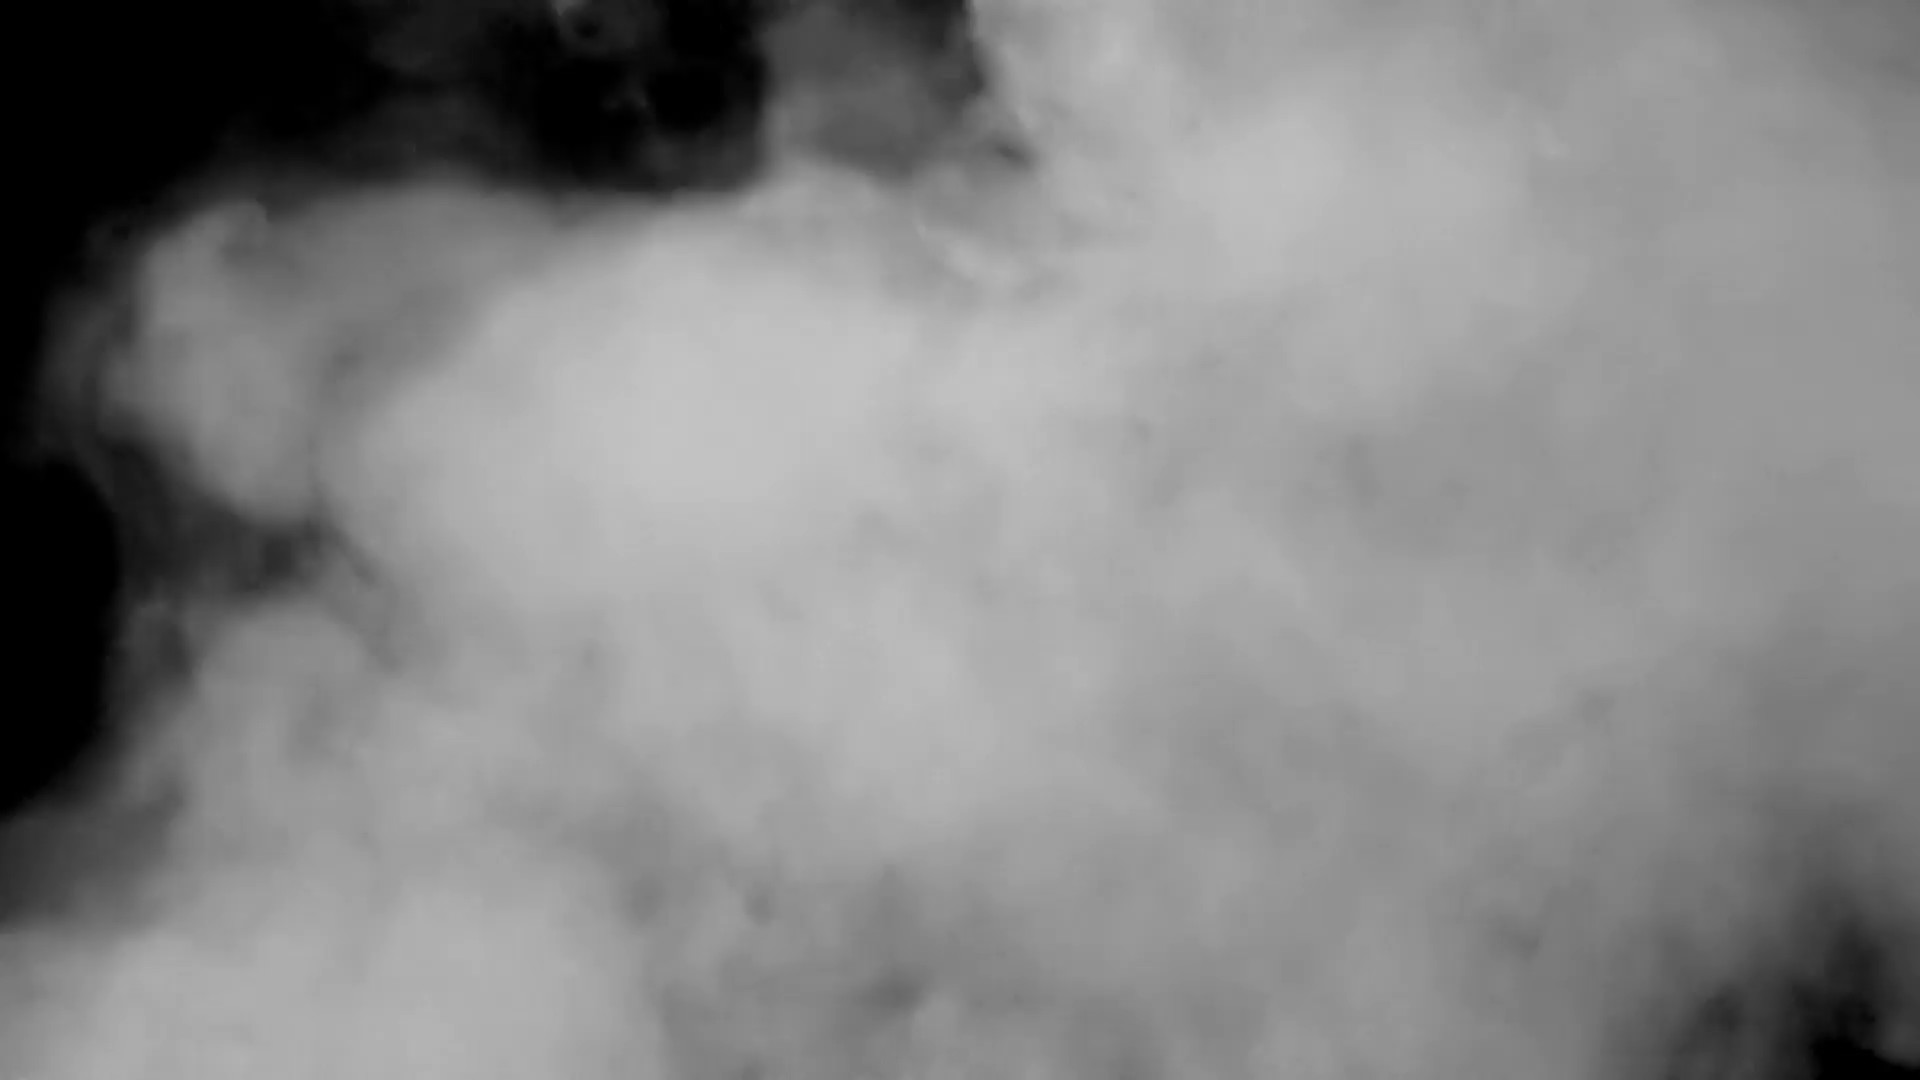 1920x1080 Grey smoke black background pipe. Abstract smoke background, desaturated  grey steam shapes rising like clouds from a pipe. Studio shot.